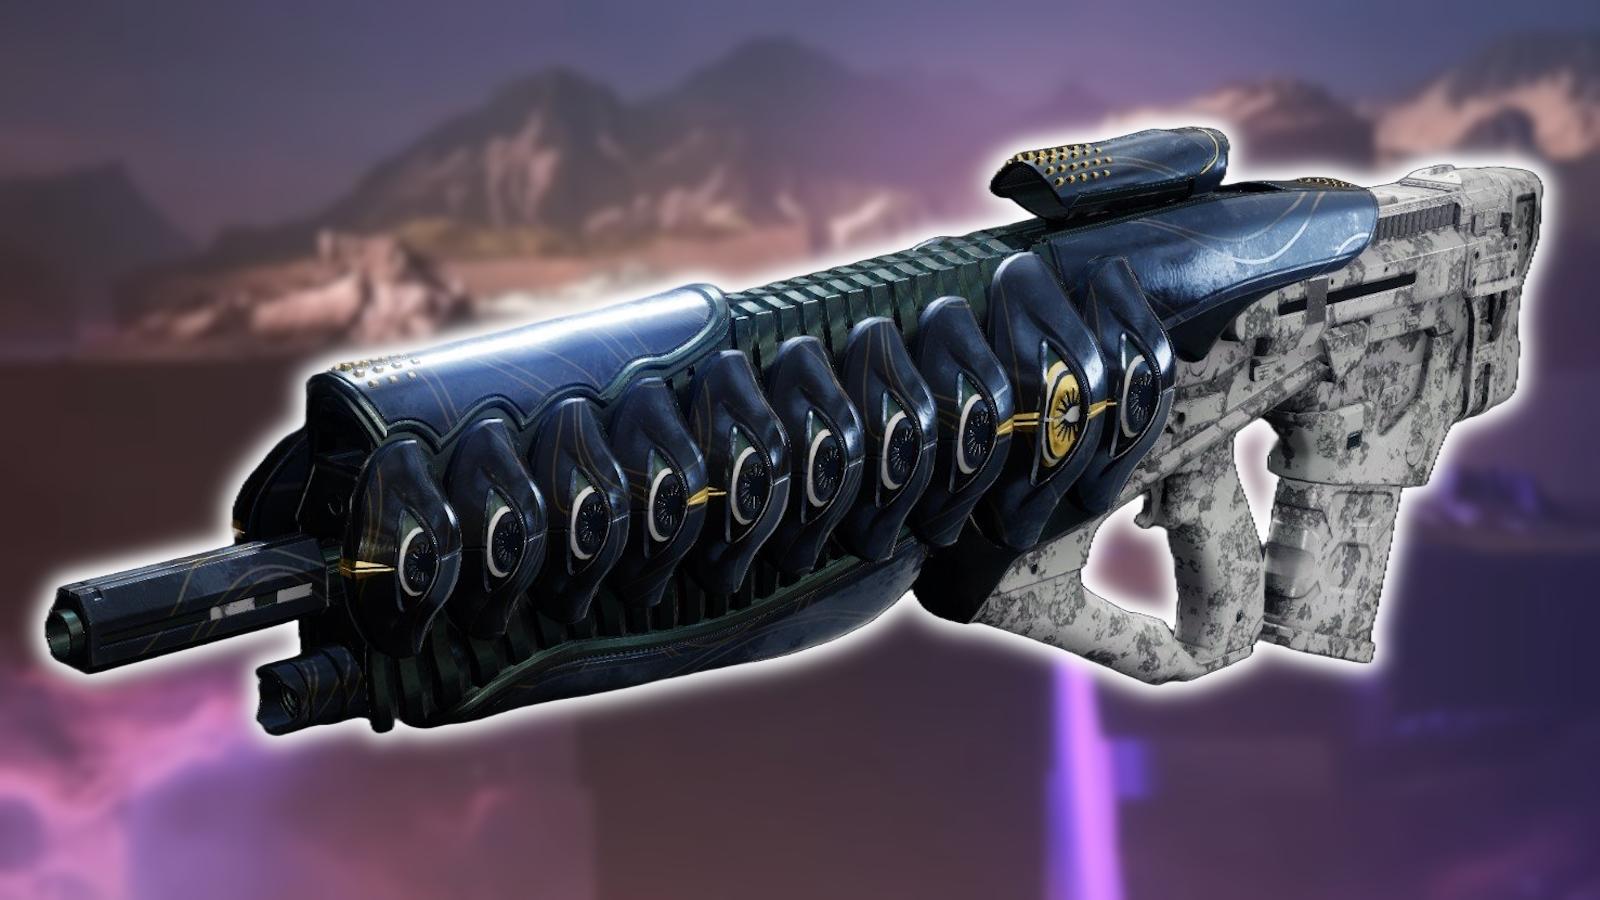 The Nullify pulse rifle in Destiny 2 The Final Shape.